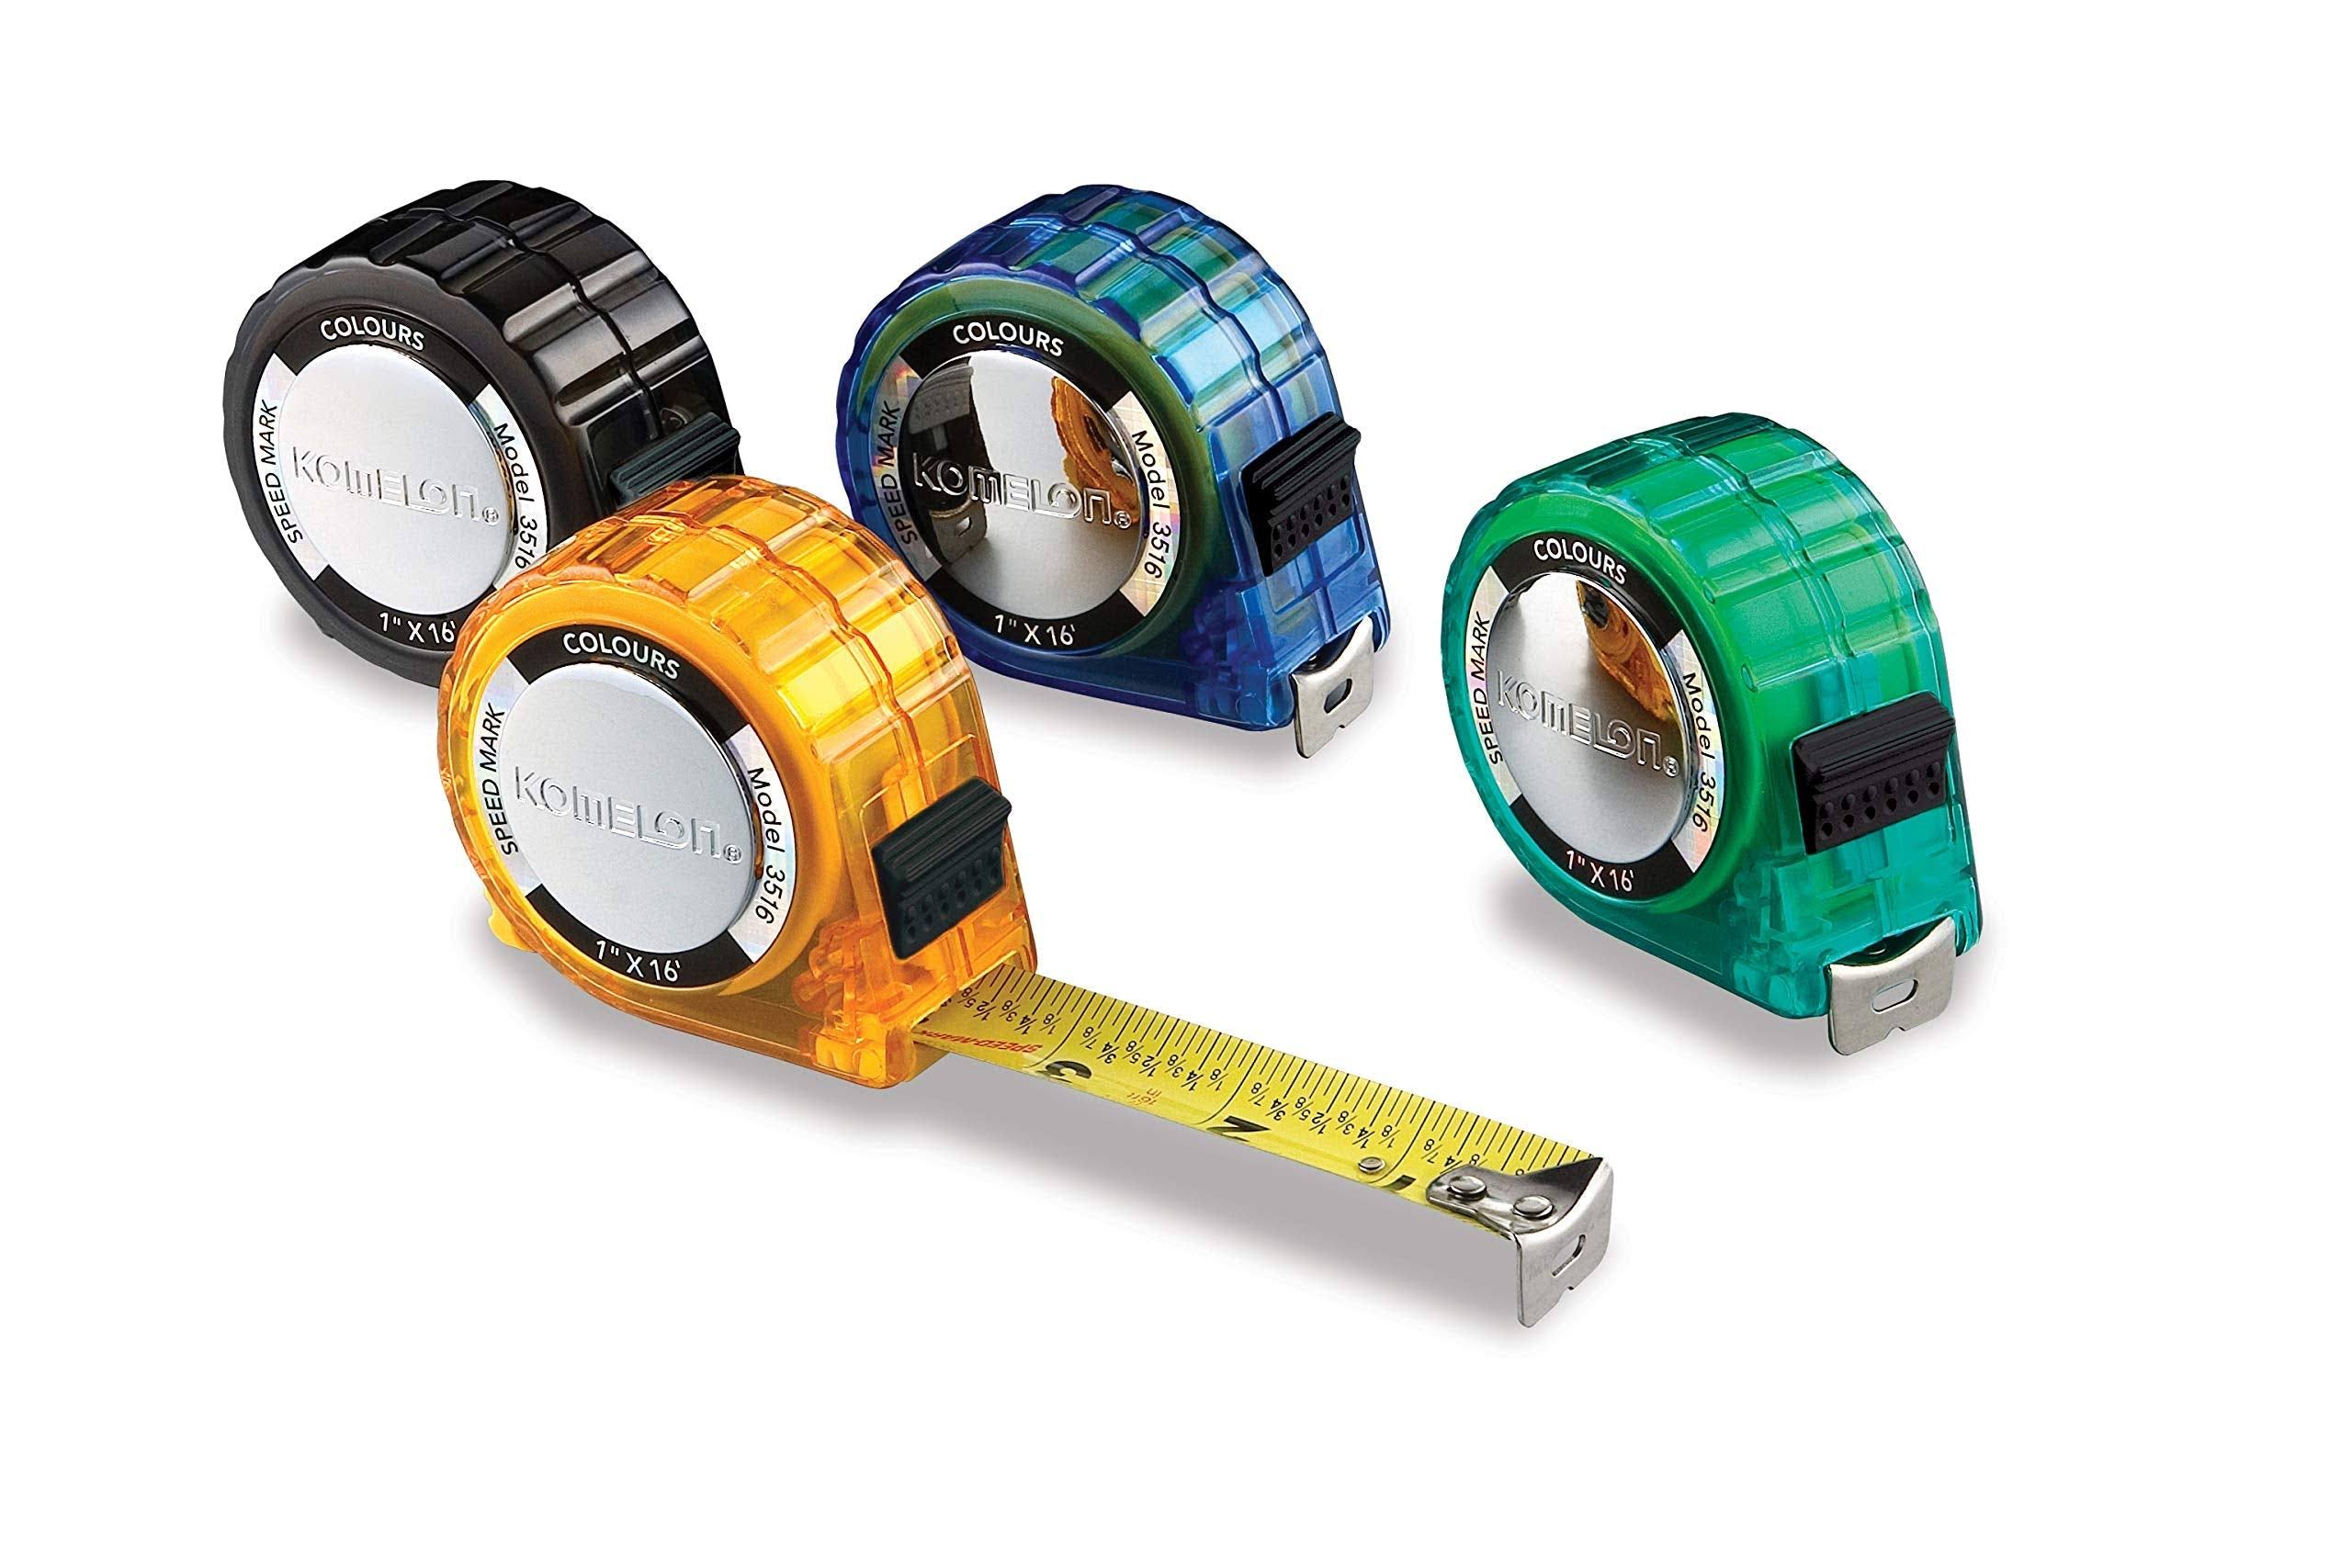 Komelon Colours Tape Measure with Acrylic Coated Steel Blade - 16ft x 1in, Assorted Colors